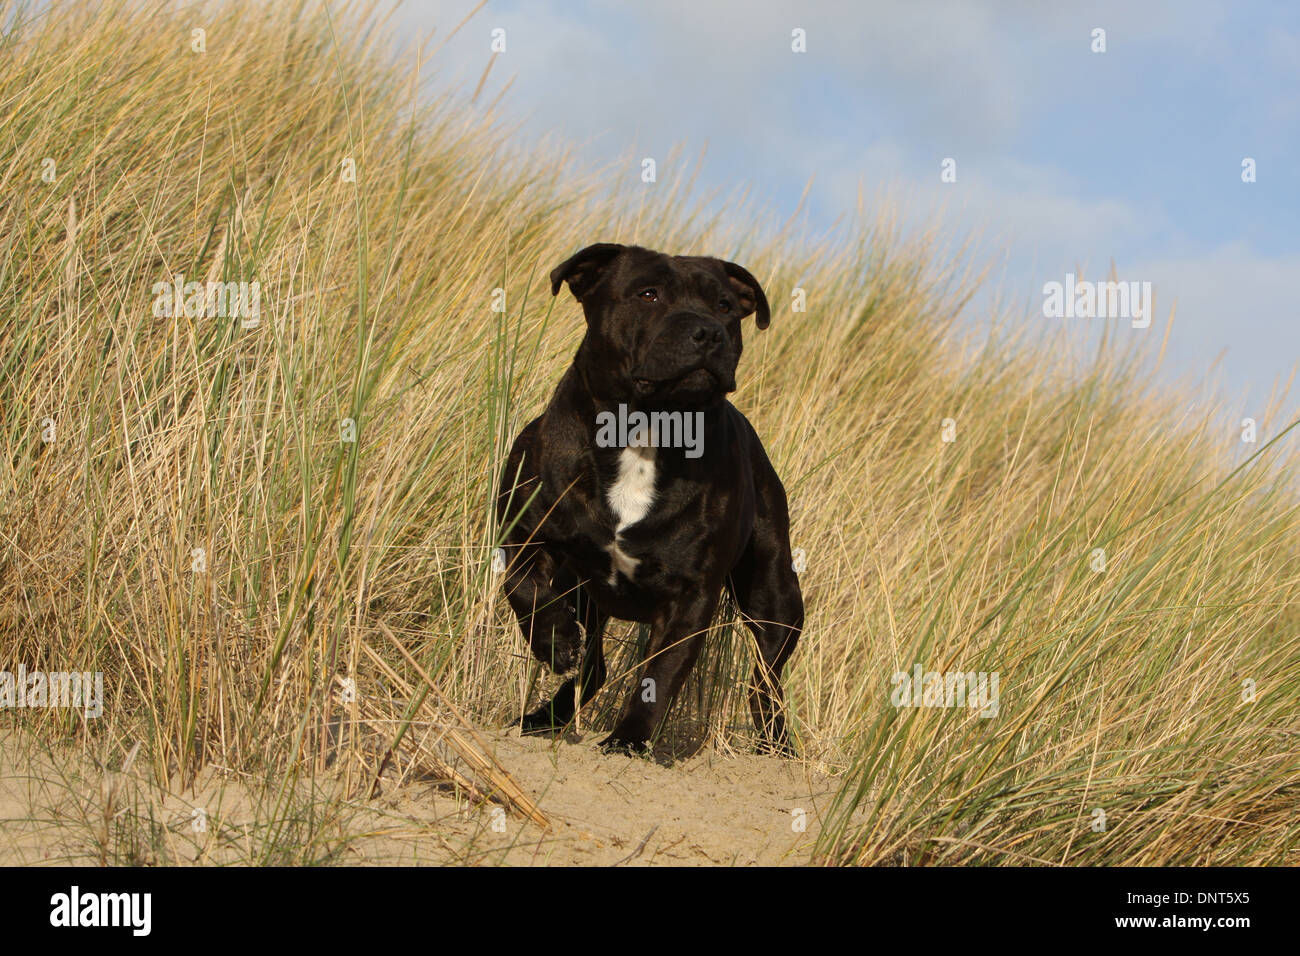 dog Staffordshire Bull Terrier / Staffie  adult standing in dunes Stock Photo